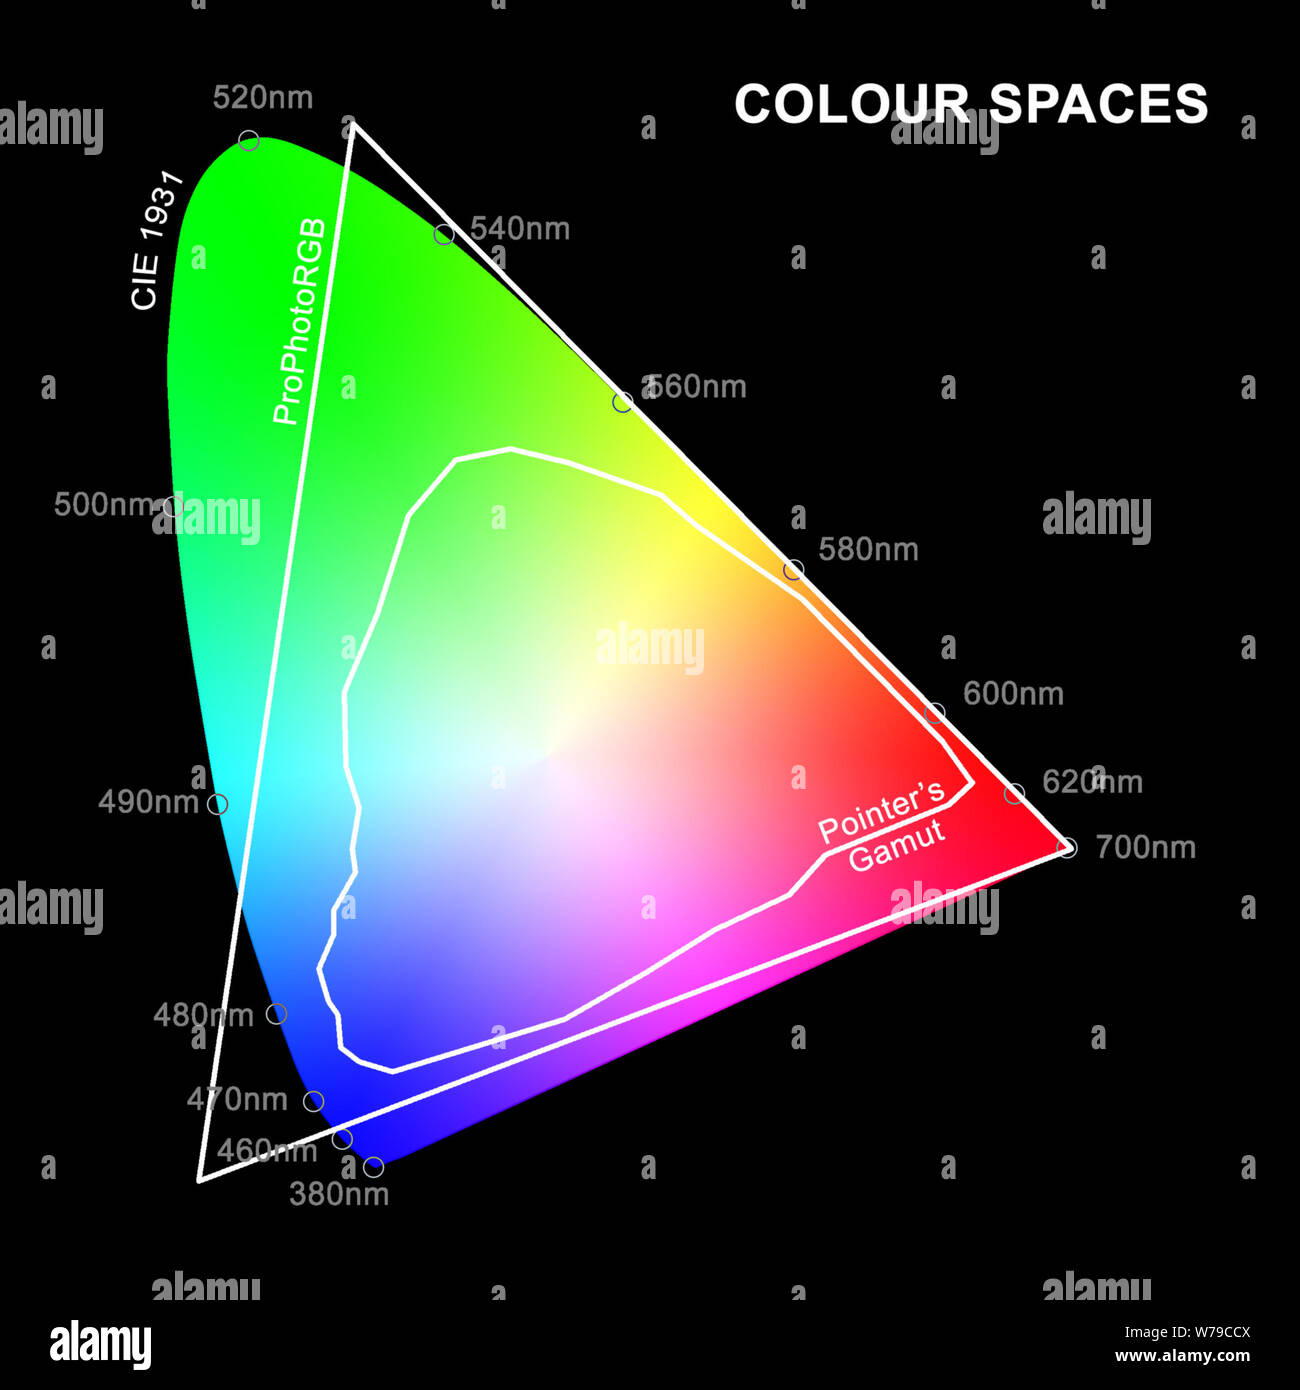 An illustration of ProPhotoRGB and Pointer's Gamut colour spaces overlaid on CIE 1931 Chromaticity Diagram of human colour perception. Stock Photo